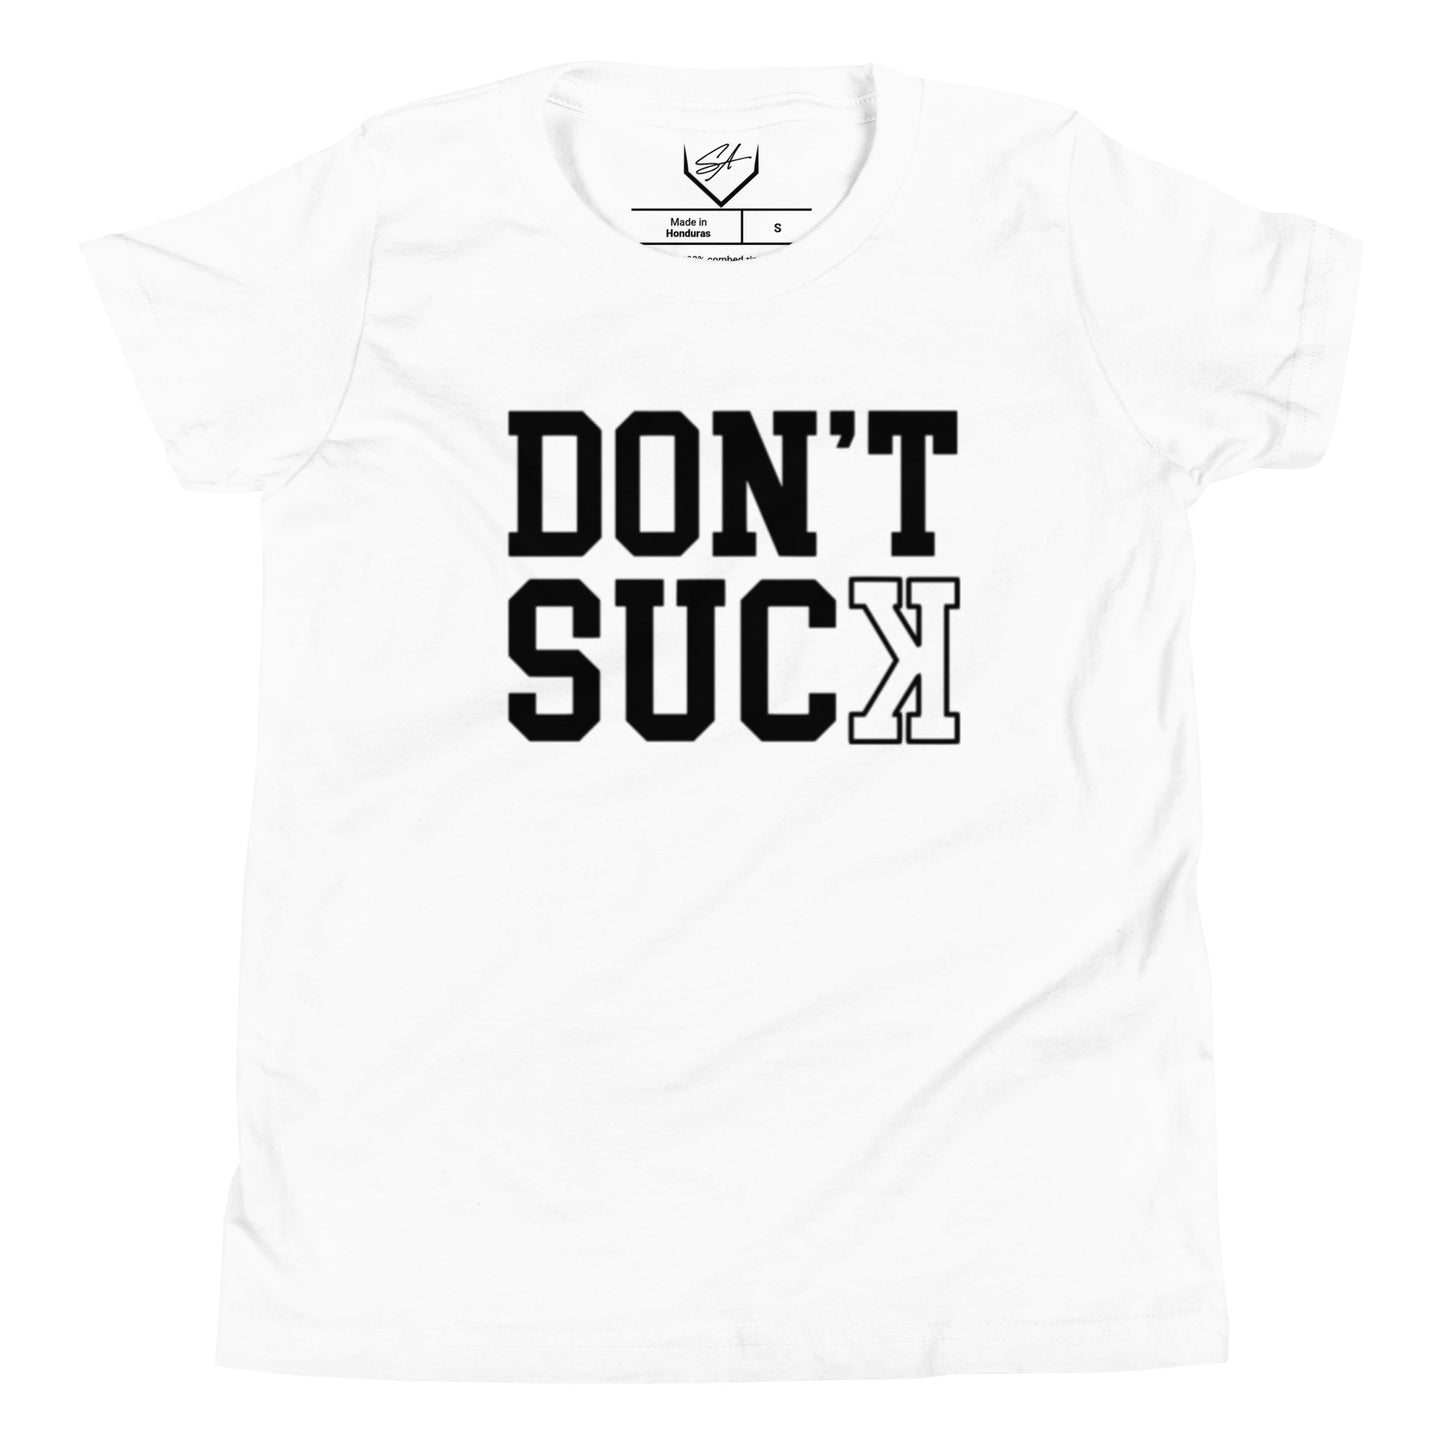 Don't Suck - Youth Tee